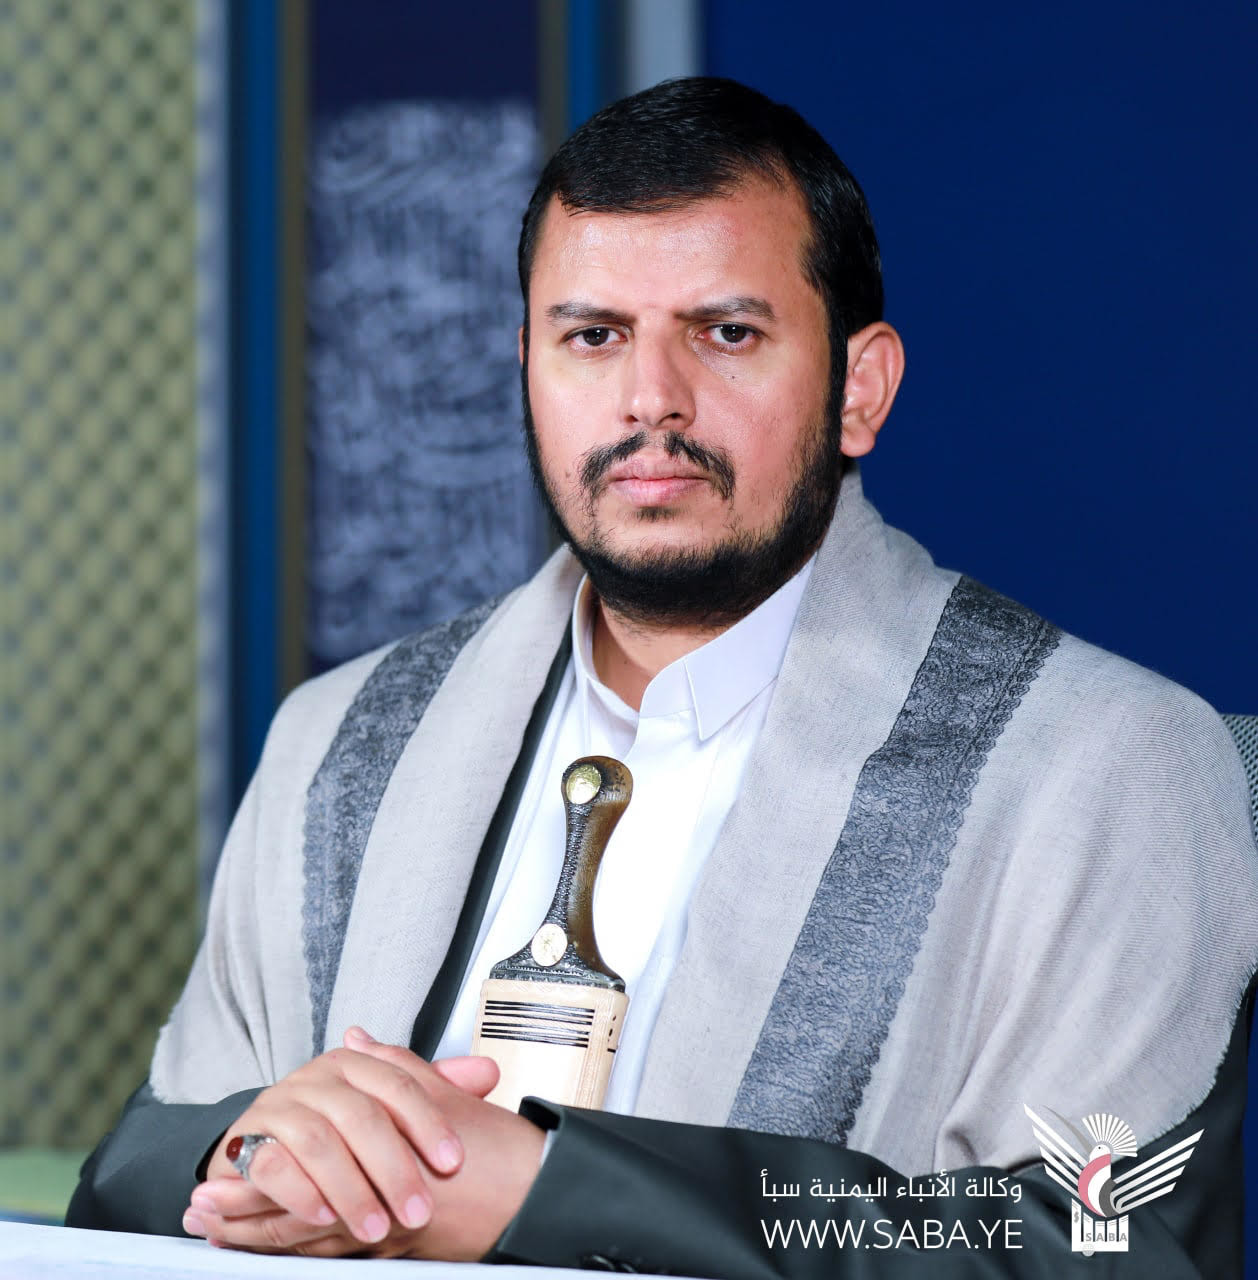 Leader of Revolution to sheikhs of Taiz: We affirmed our readiness to open the roads to serve the citizens